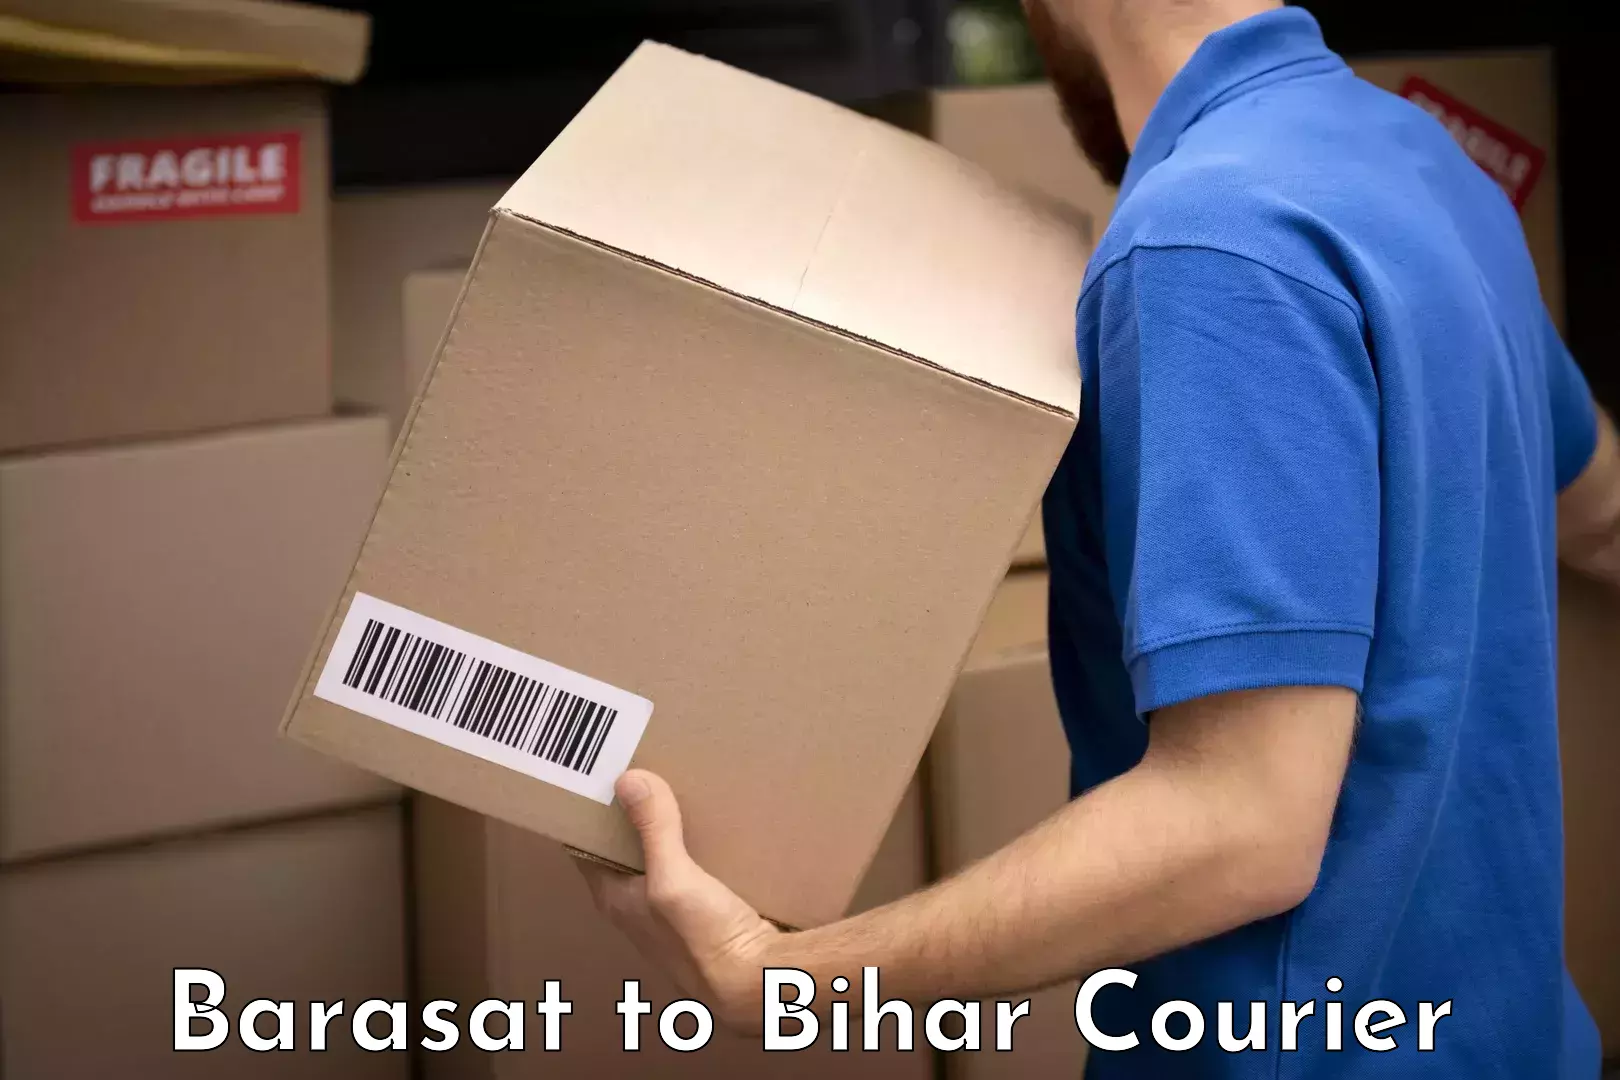 Instant baggage transport quote Barasat to Kaluahi